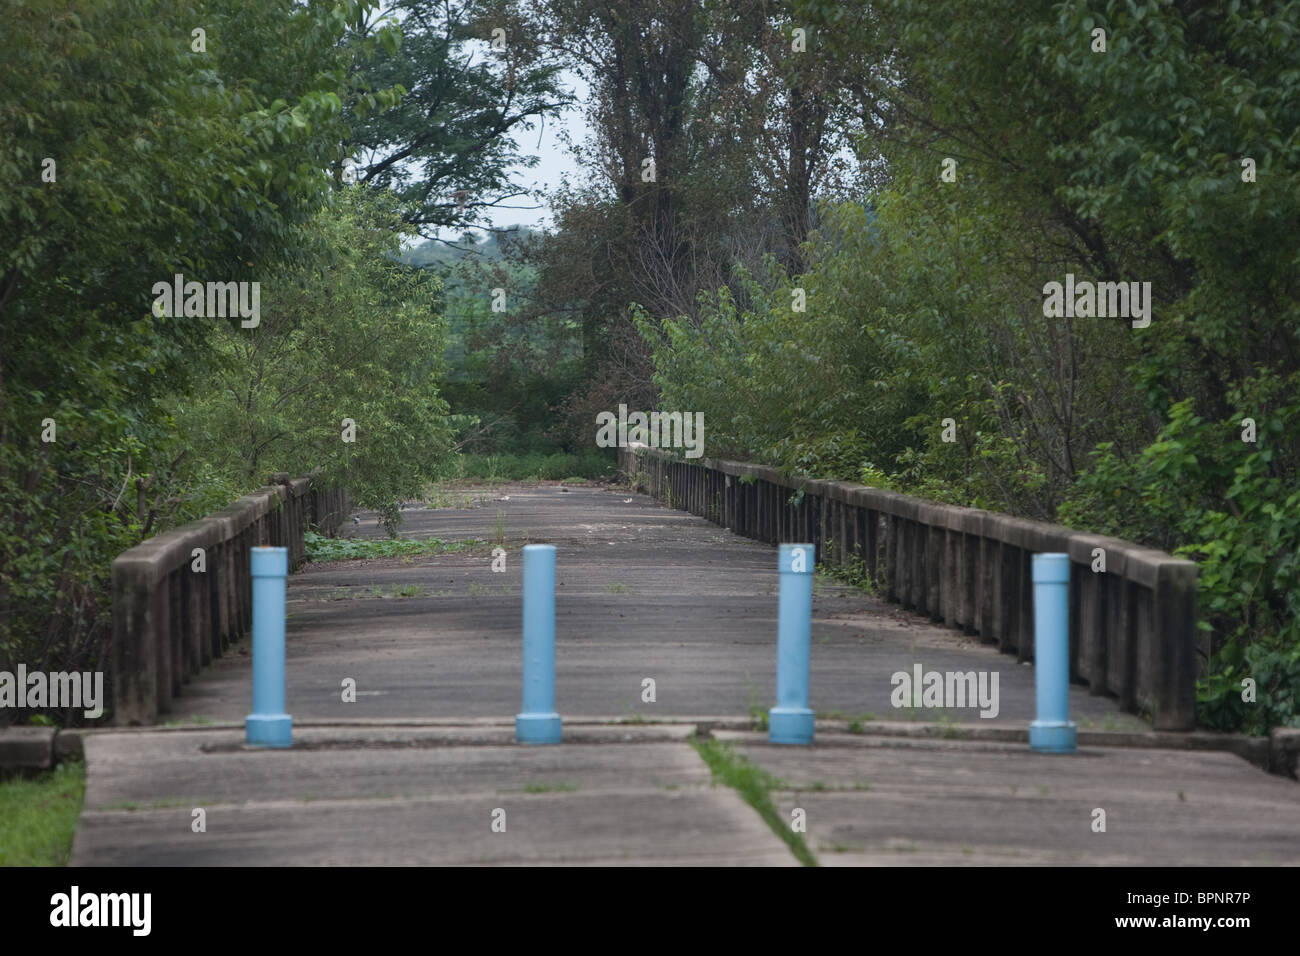 The 'Bridge of No Return' inside the Demilitarized zone (DMZ) between South and North Korea, Saturday 28th August 2010. Stock Photo